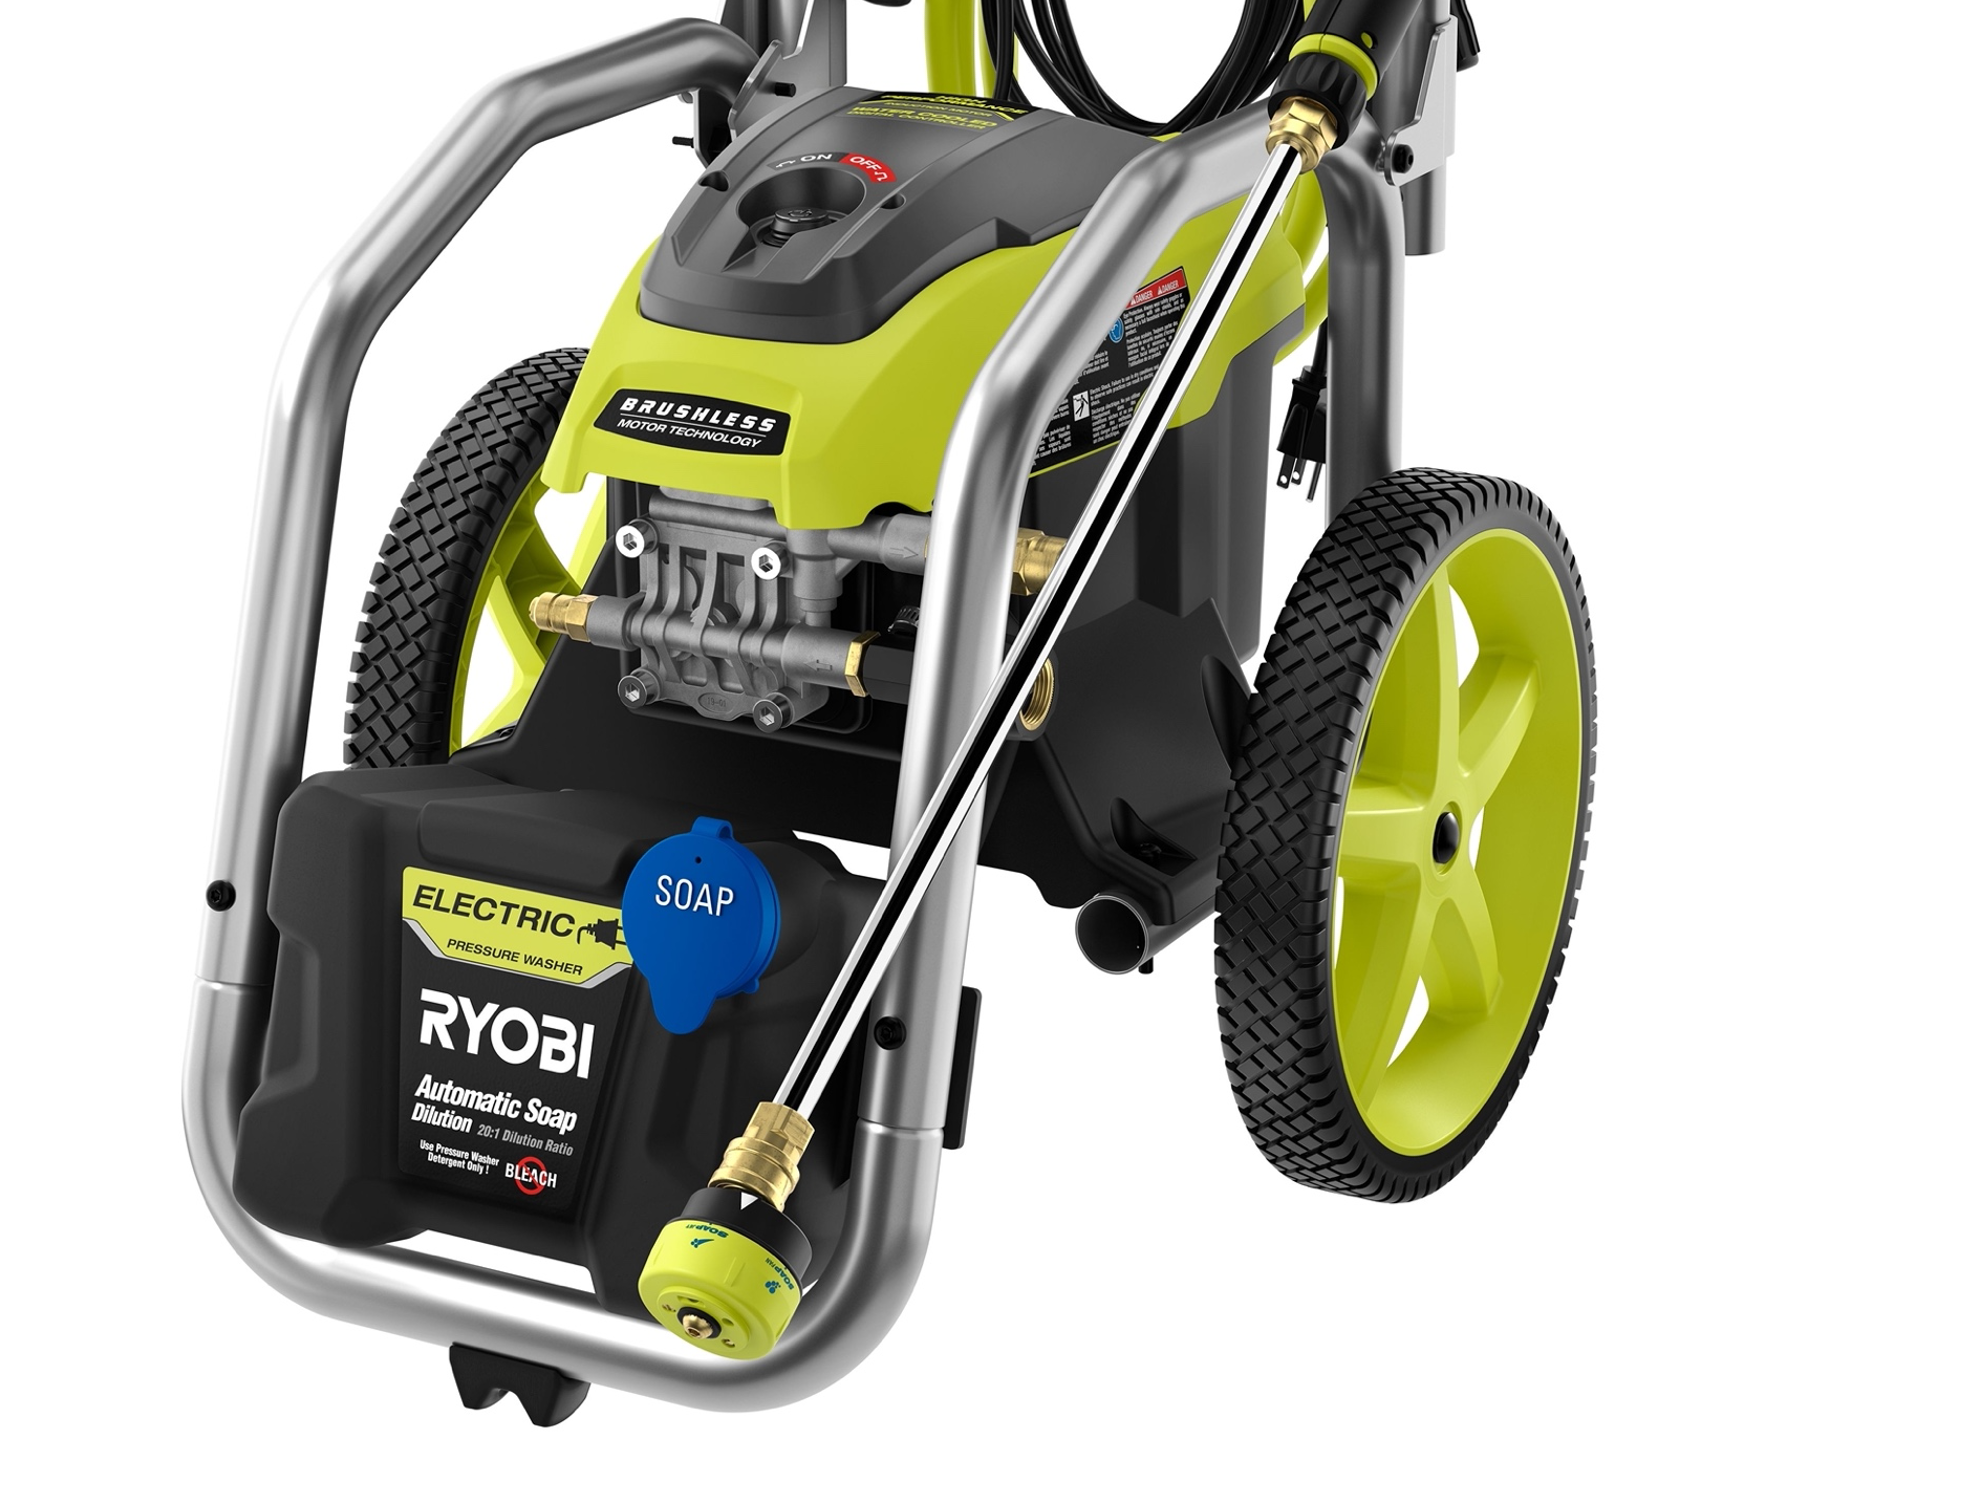 Product Features Image for 3000 PSI 1.1 GPM BRUSHLESS ELECTRIC PRESSURE WASHER.